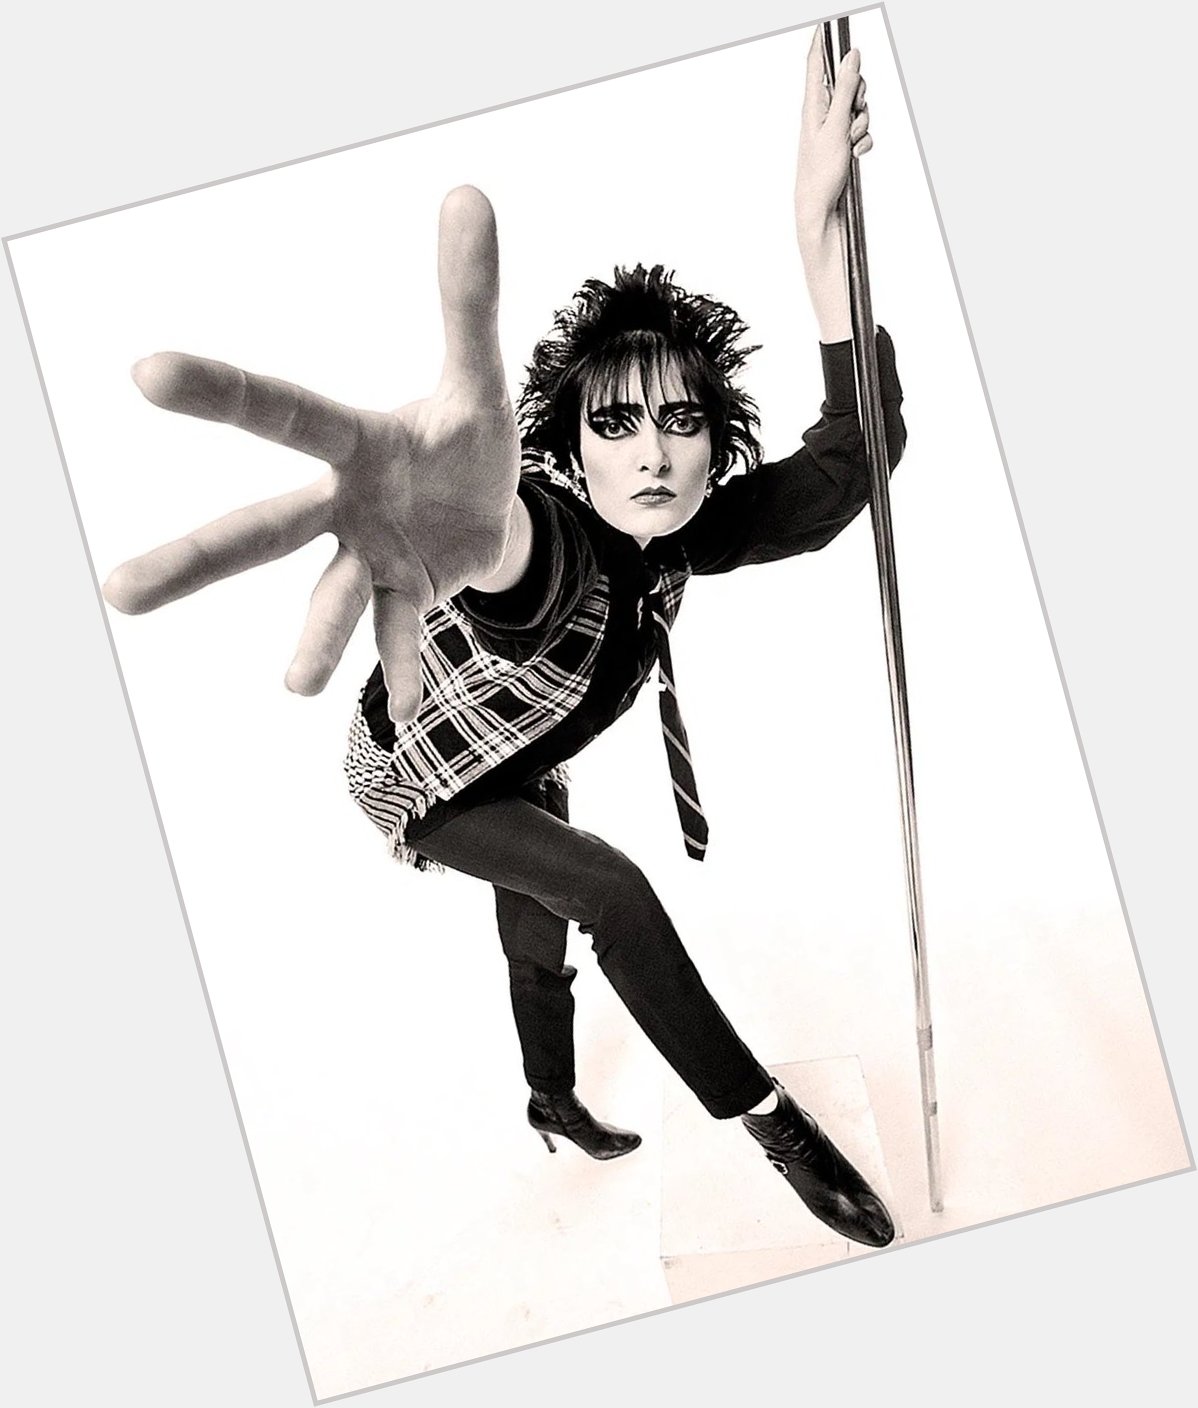 Happy 64th birthday to the incomparable Siouxsie Sioux, one of the coolest singers in the world 